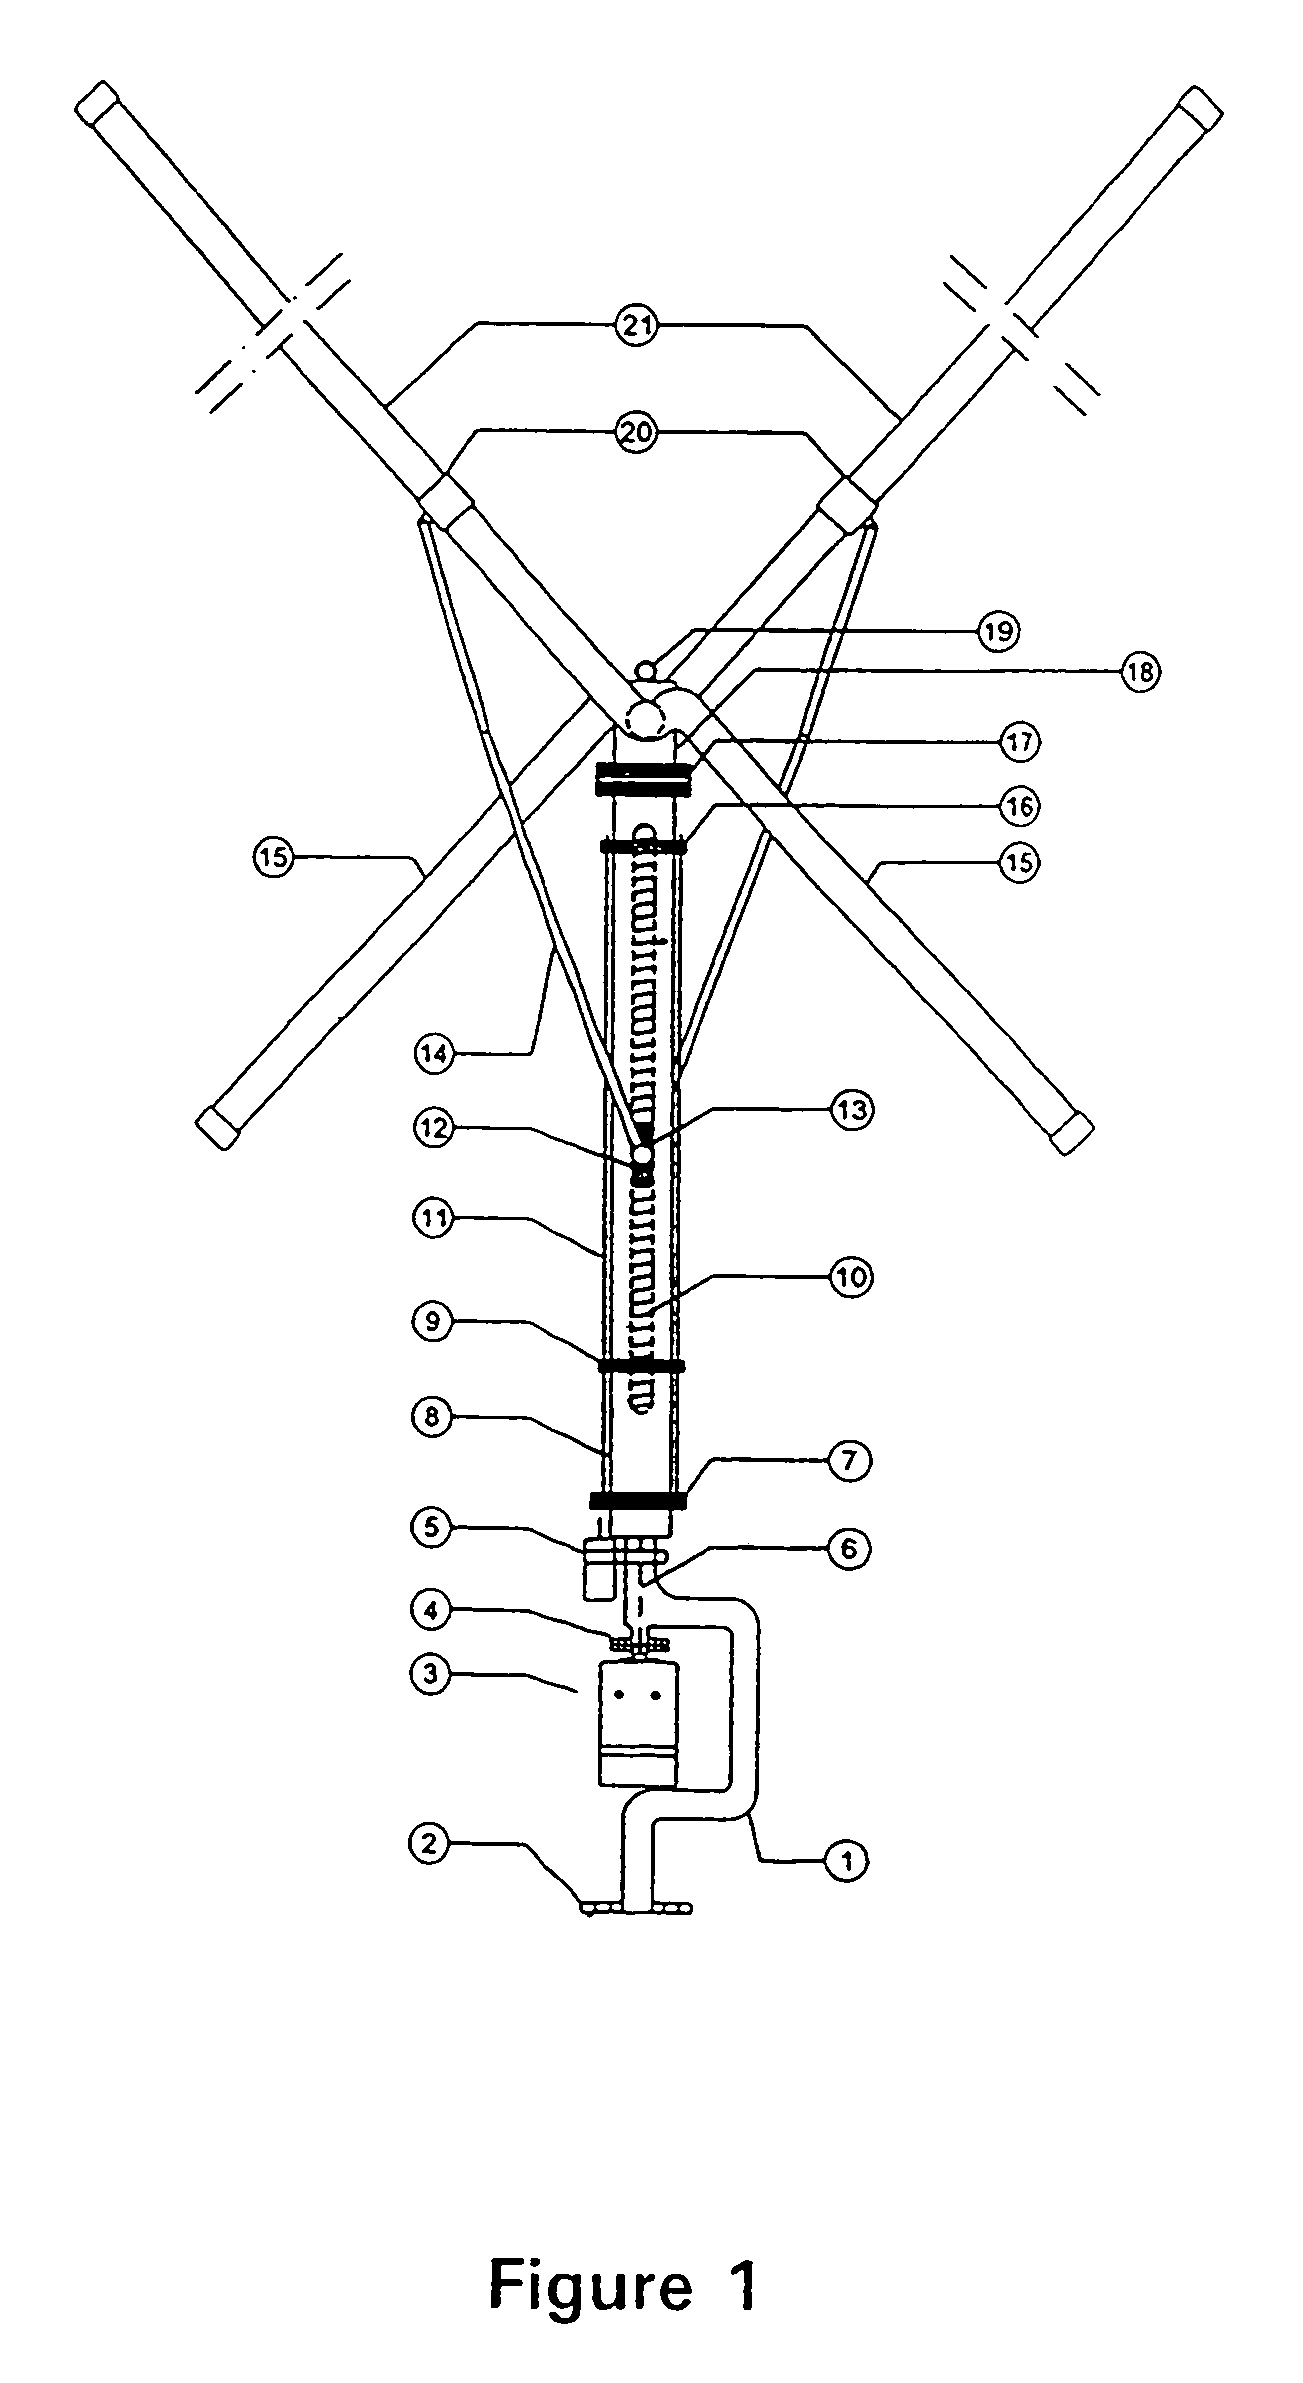 Apparatus and a method for cleaning enclosed spaces